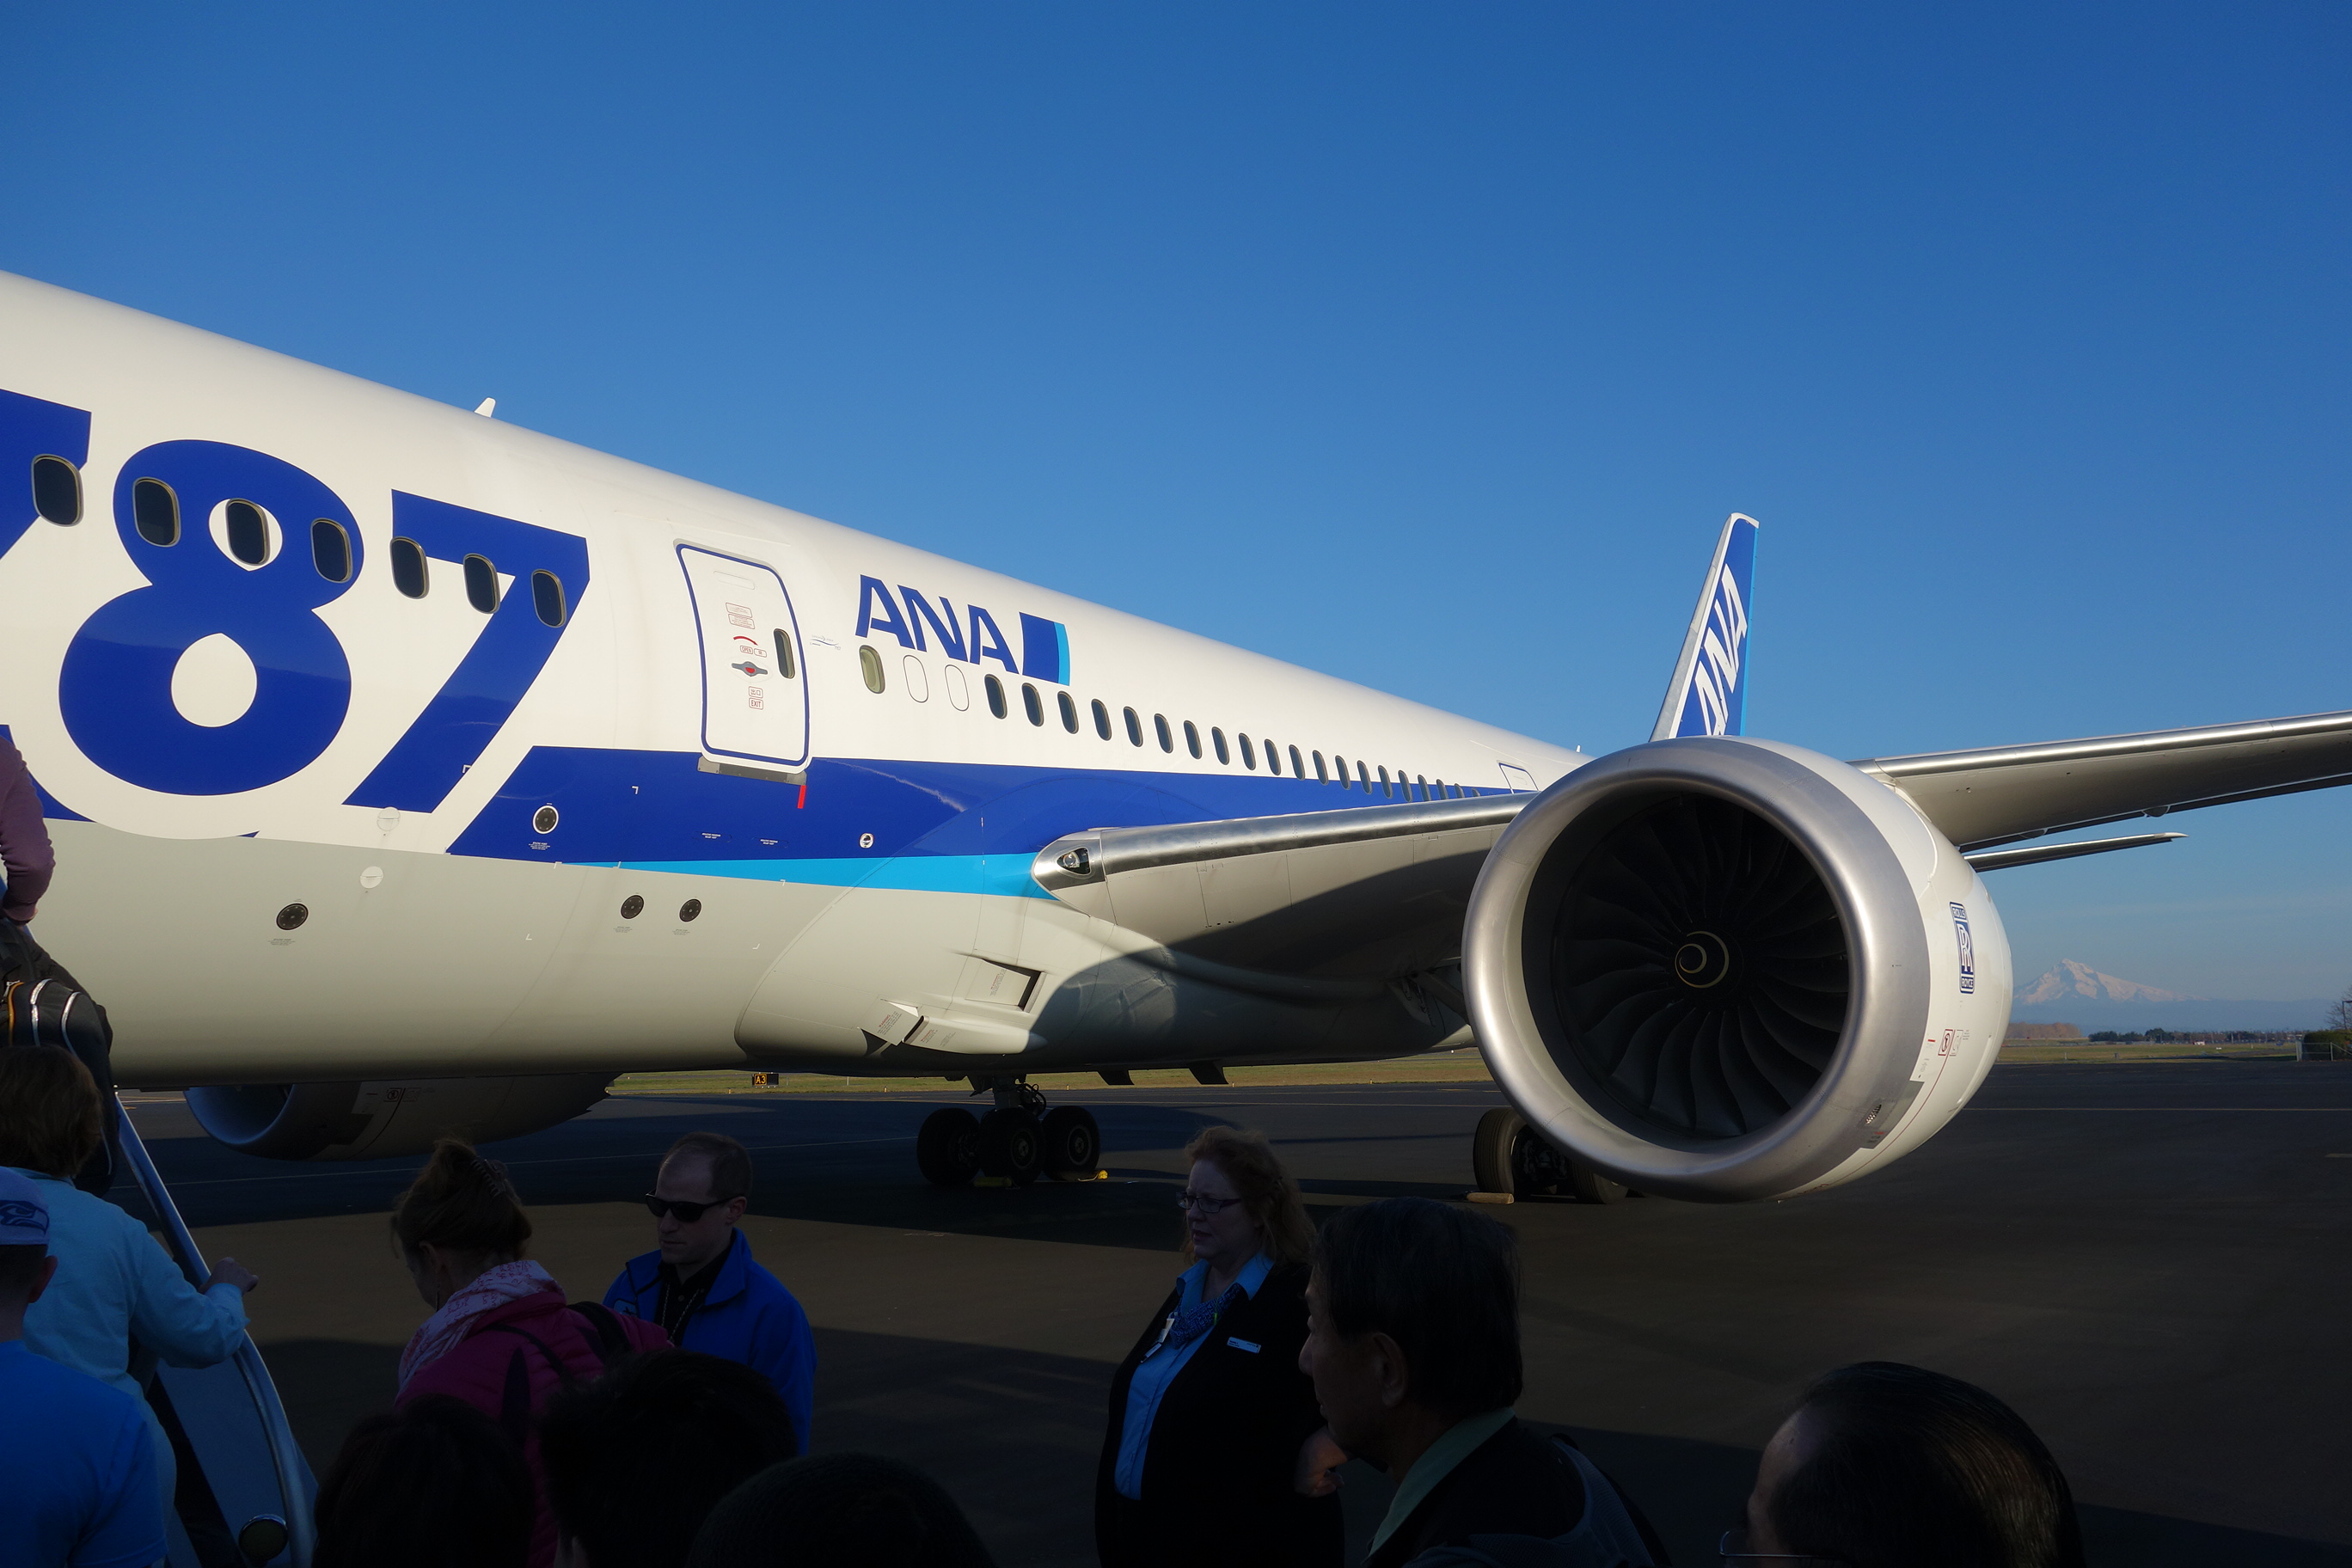 Gorgeous day in Portland, but ANA's 787 shouldn't be there